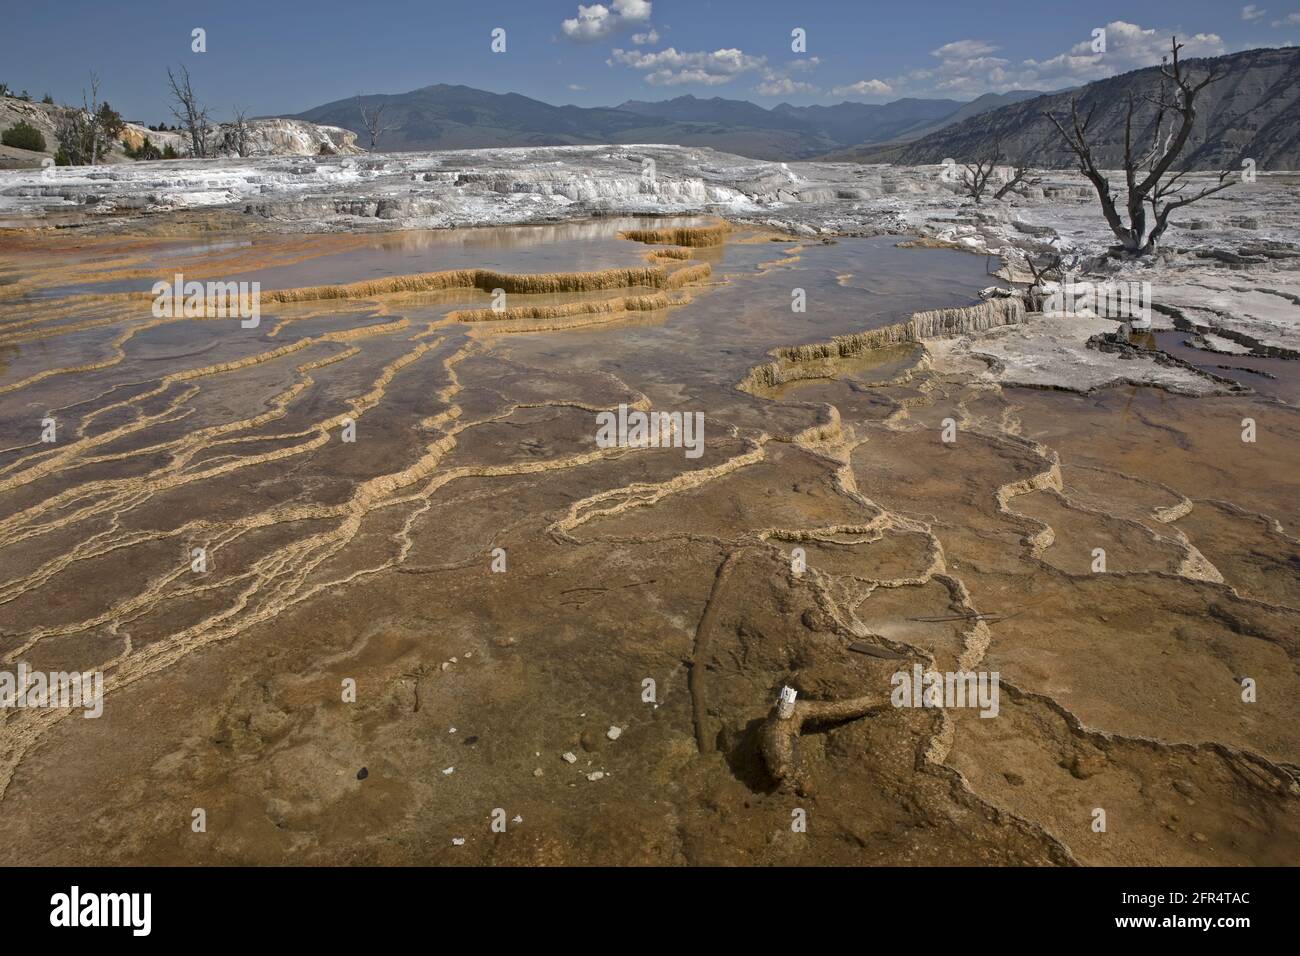 Mammoth Terraces filled with water in the Yellowstone National Park, Wyoming, USA. Vast travertine plateau. Stock Photo